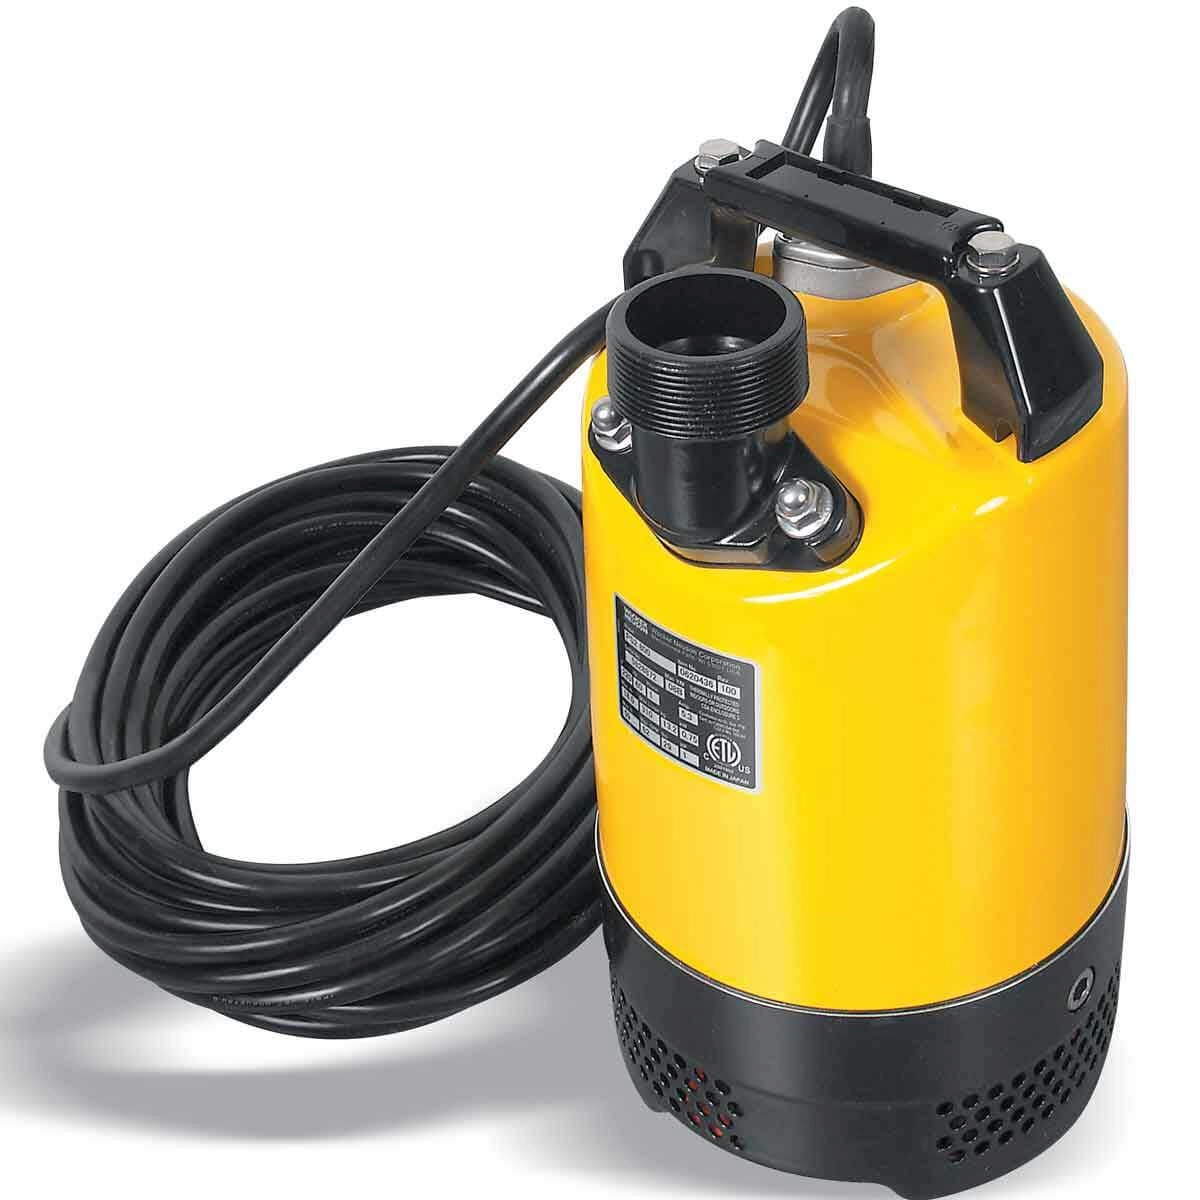 Submersible pump for rent